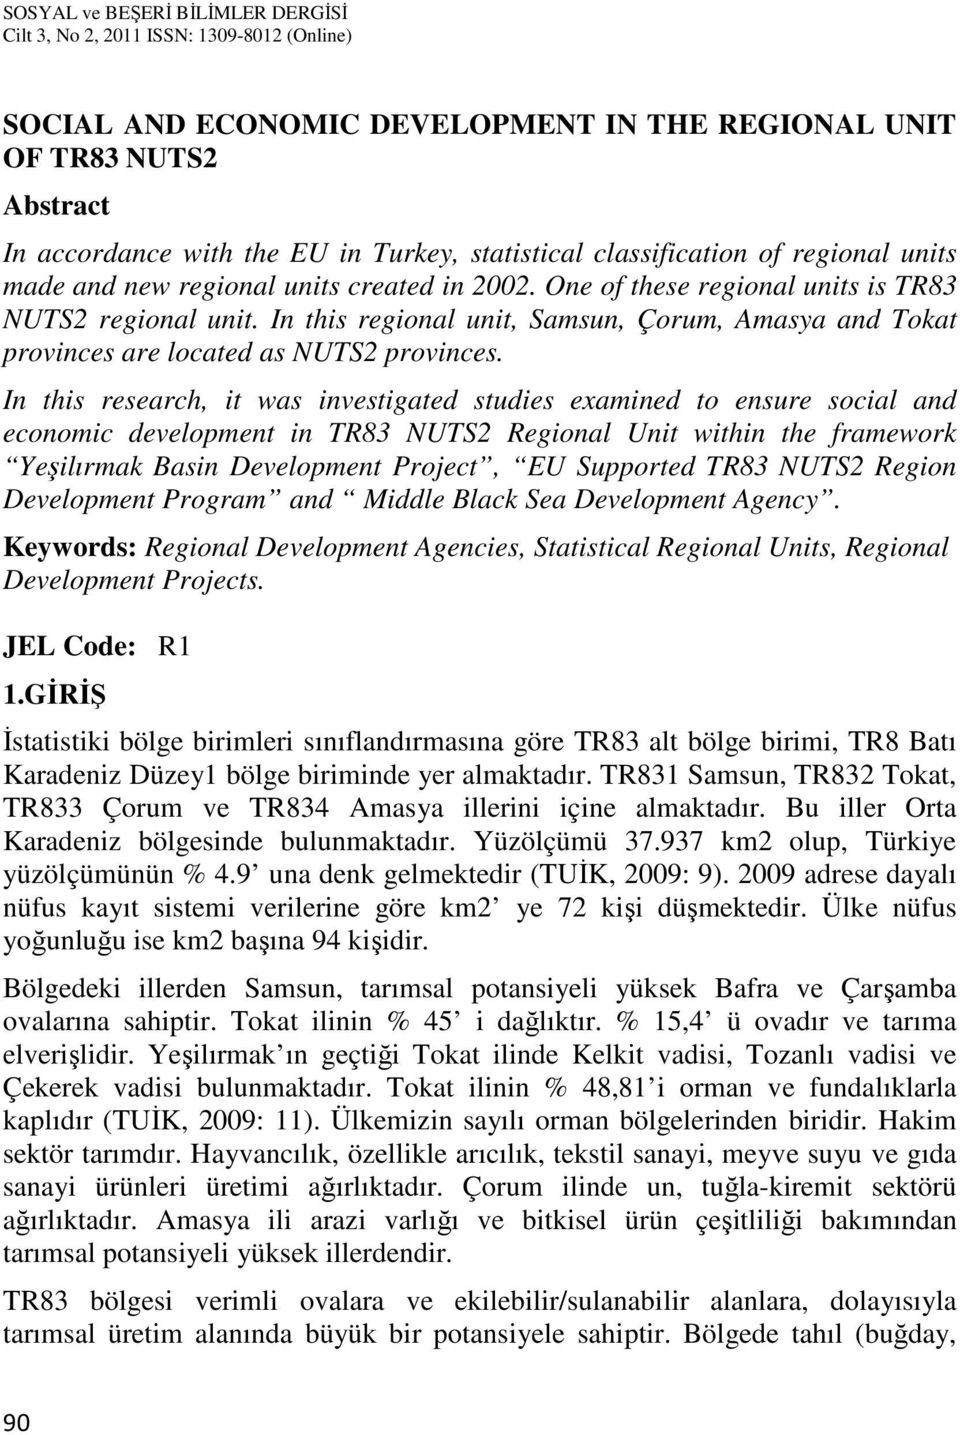 In this research, it was investigated studies examined to ensure social and economic development in TR83 NUTS2 Regional Unit within the framework Yeşilırmak Basin Development Project, EU Supported